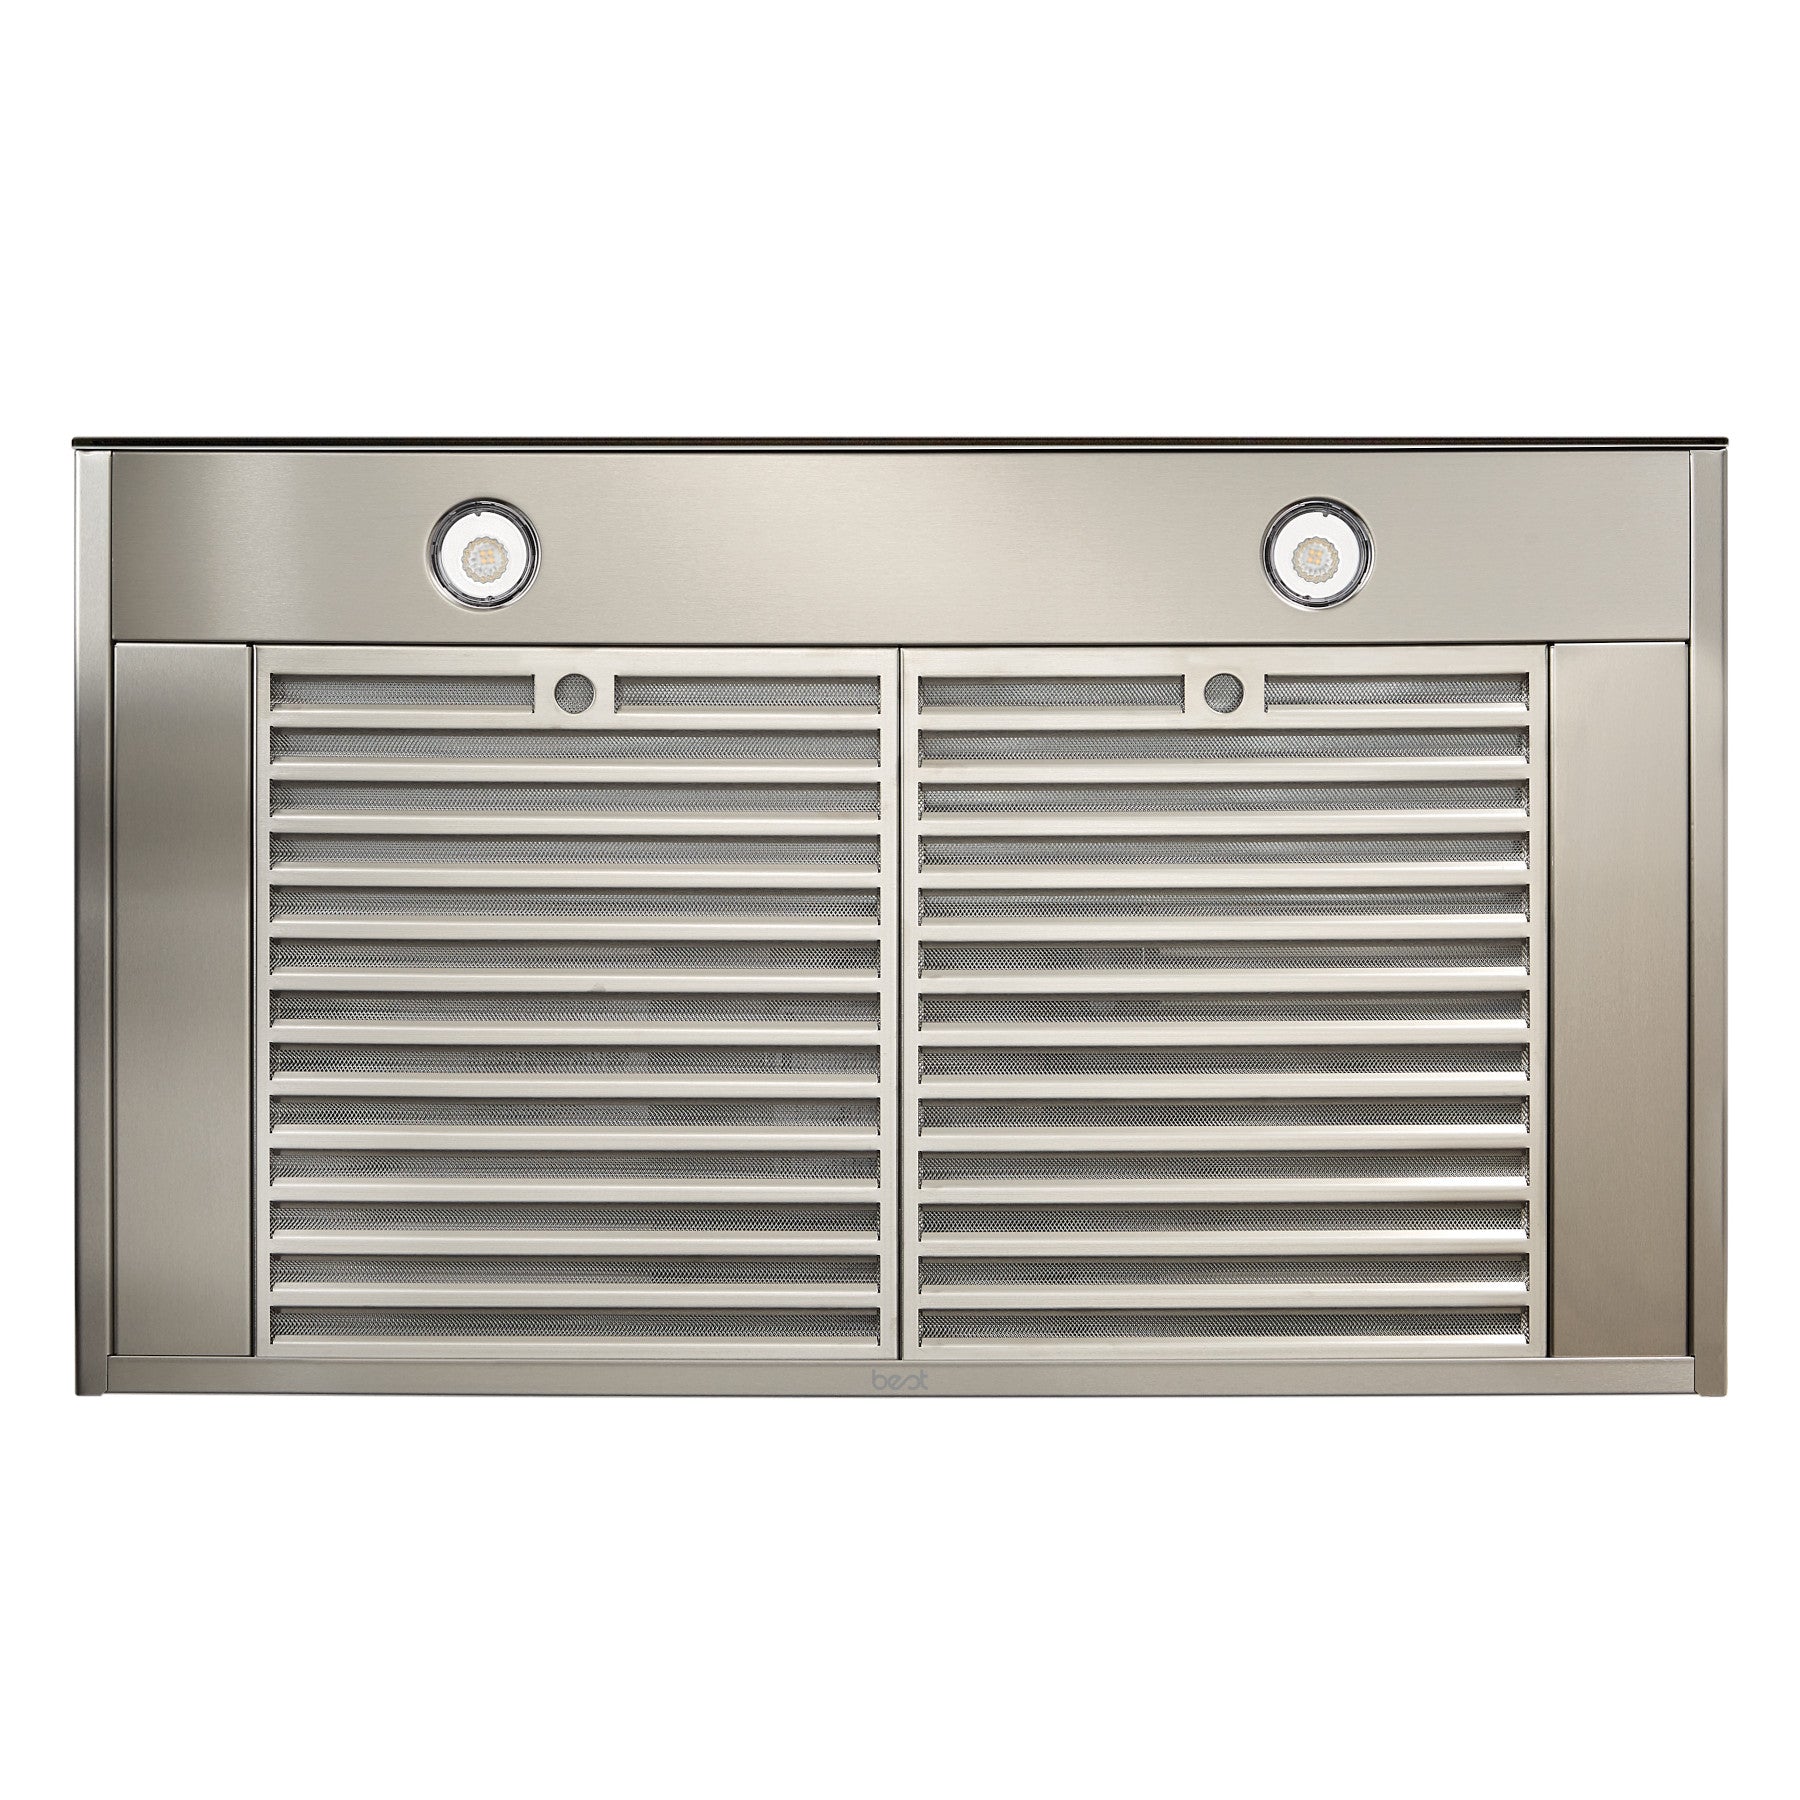 Best - 30 Inch 650 CFM Wall Mount and Chimney Range Vent in Stainless - WCB3I30SBB